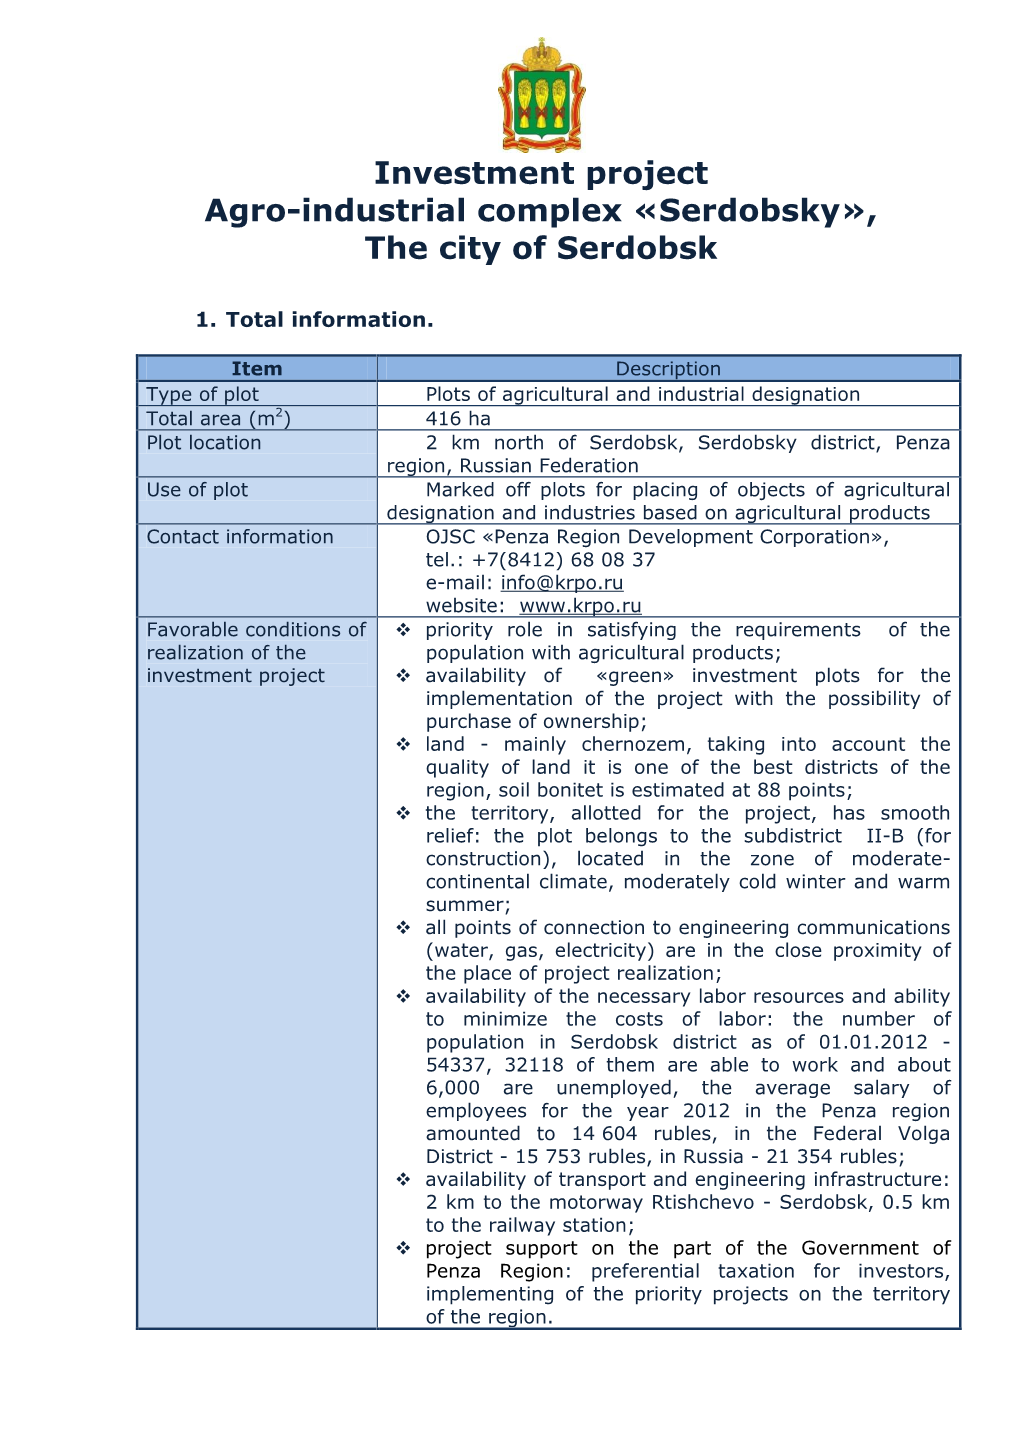 Investment Project Agro-Industrial Complex «Serdobsky», the City of Serdobsk